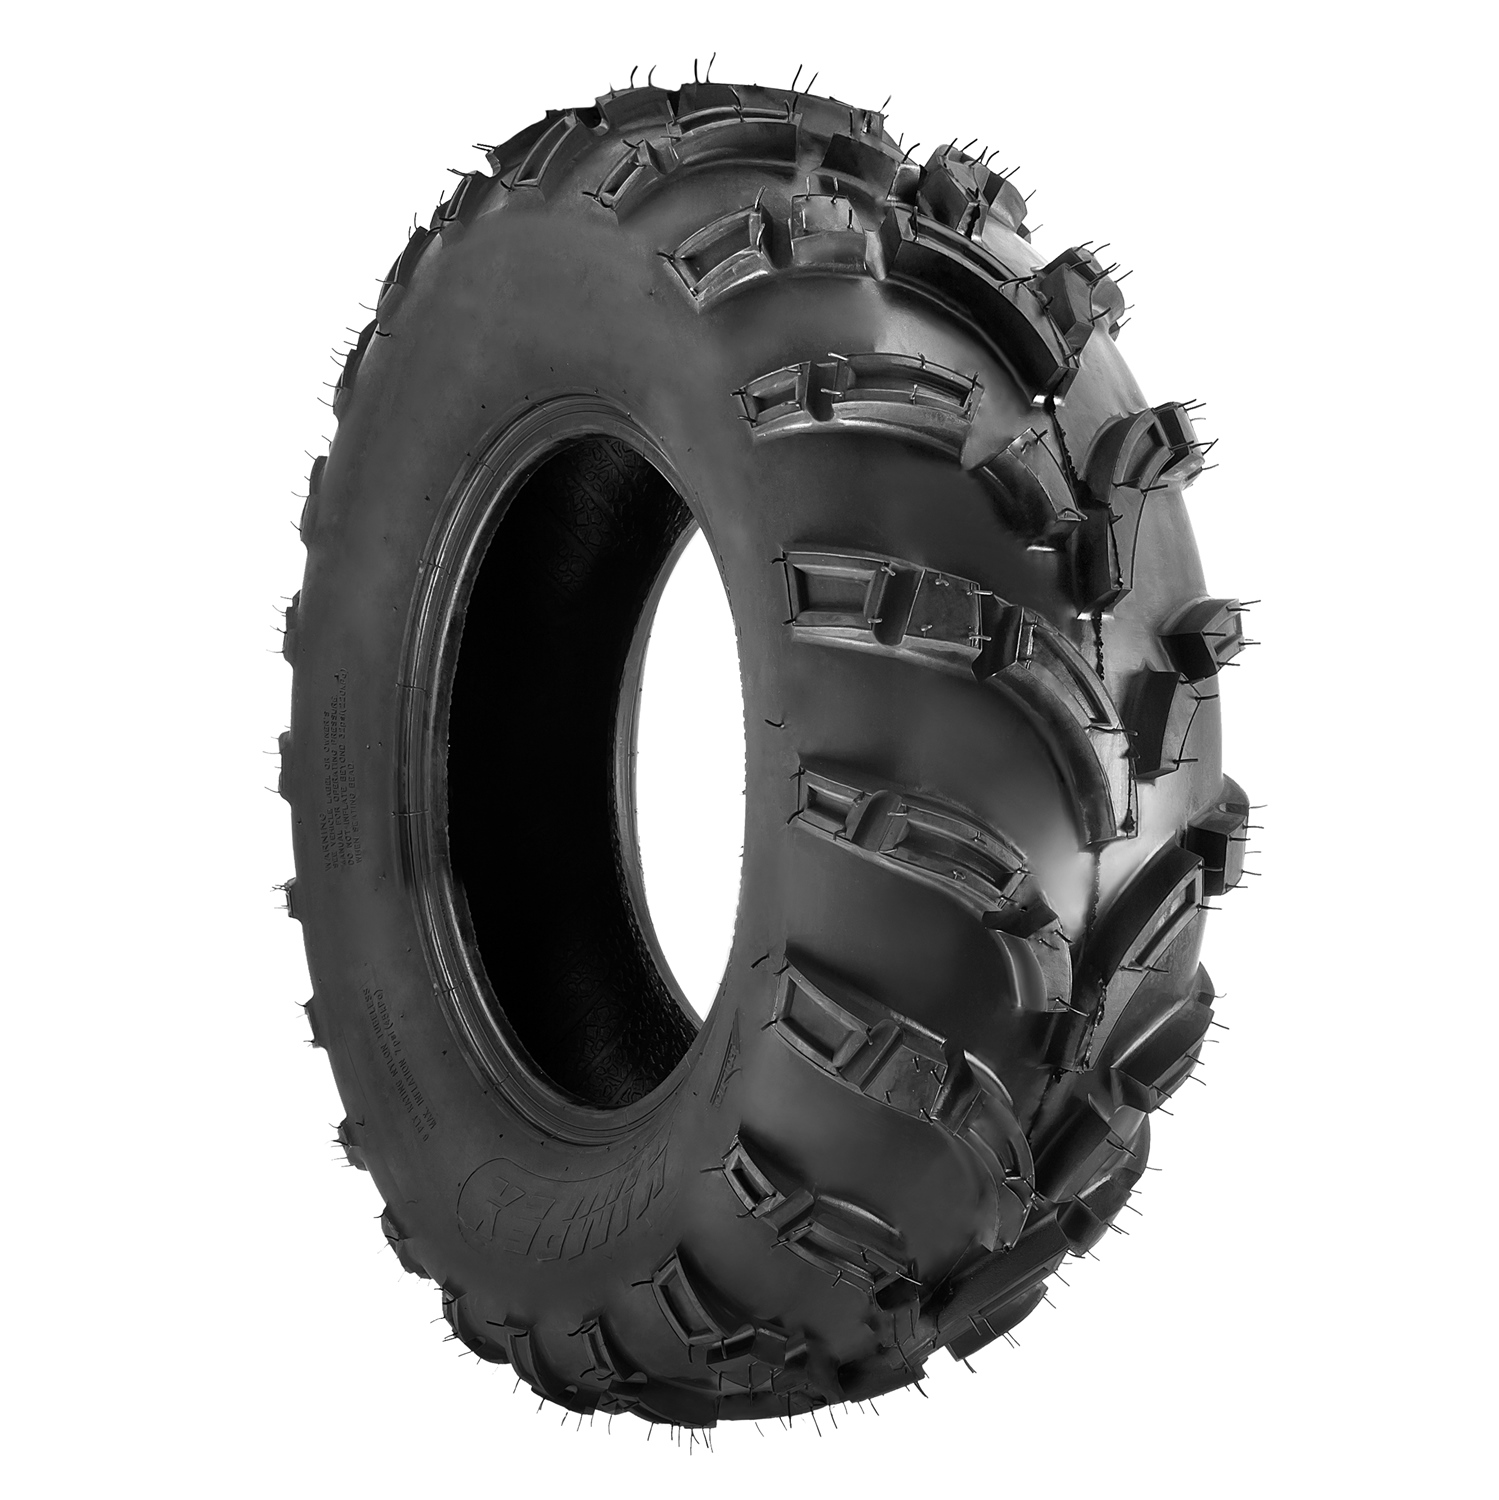 Kimpex Tire Trail Fighter 25x8-12 Ply 6 Front Bias All Terrain Snow 25x8x12